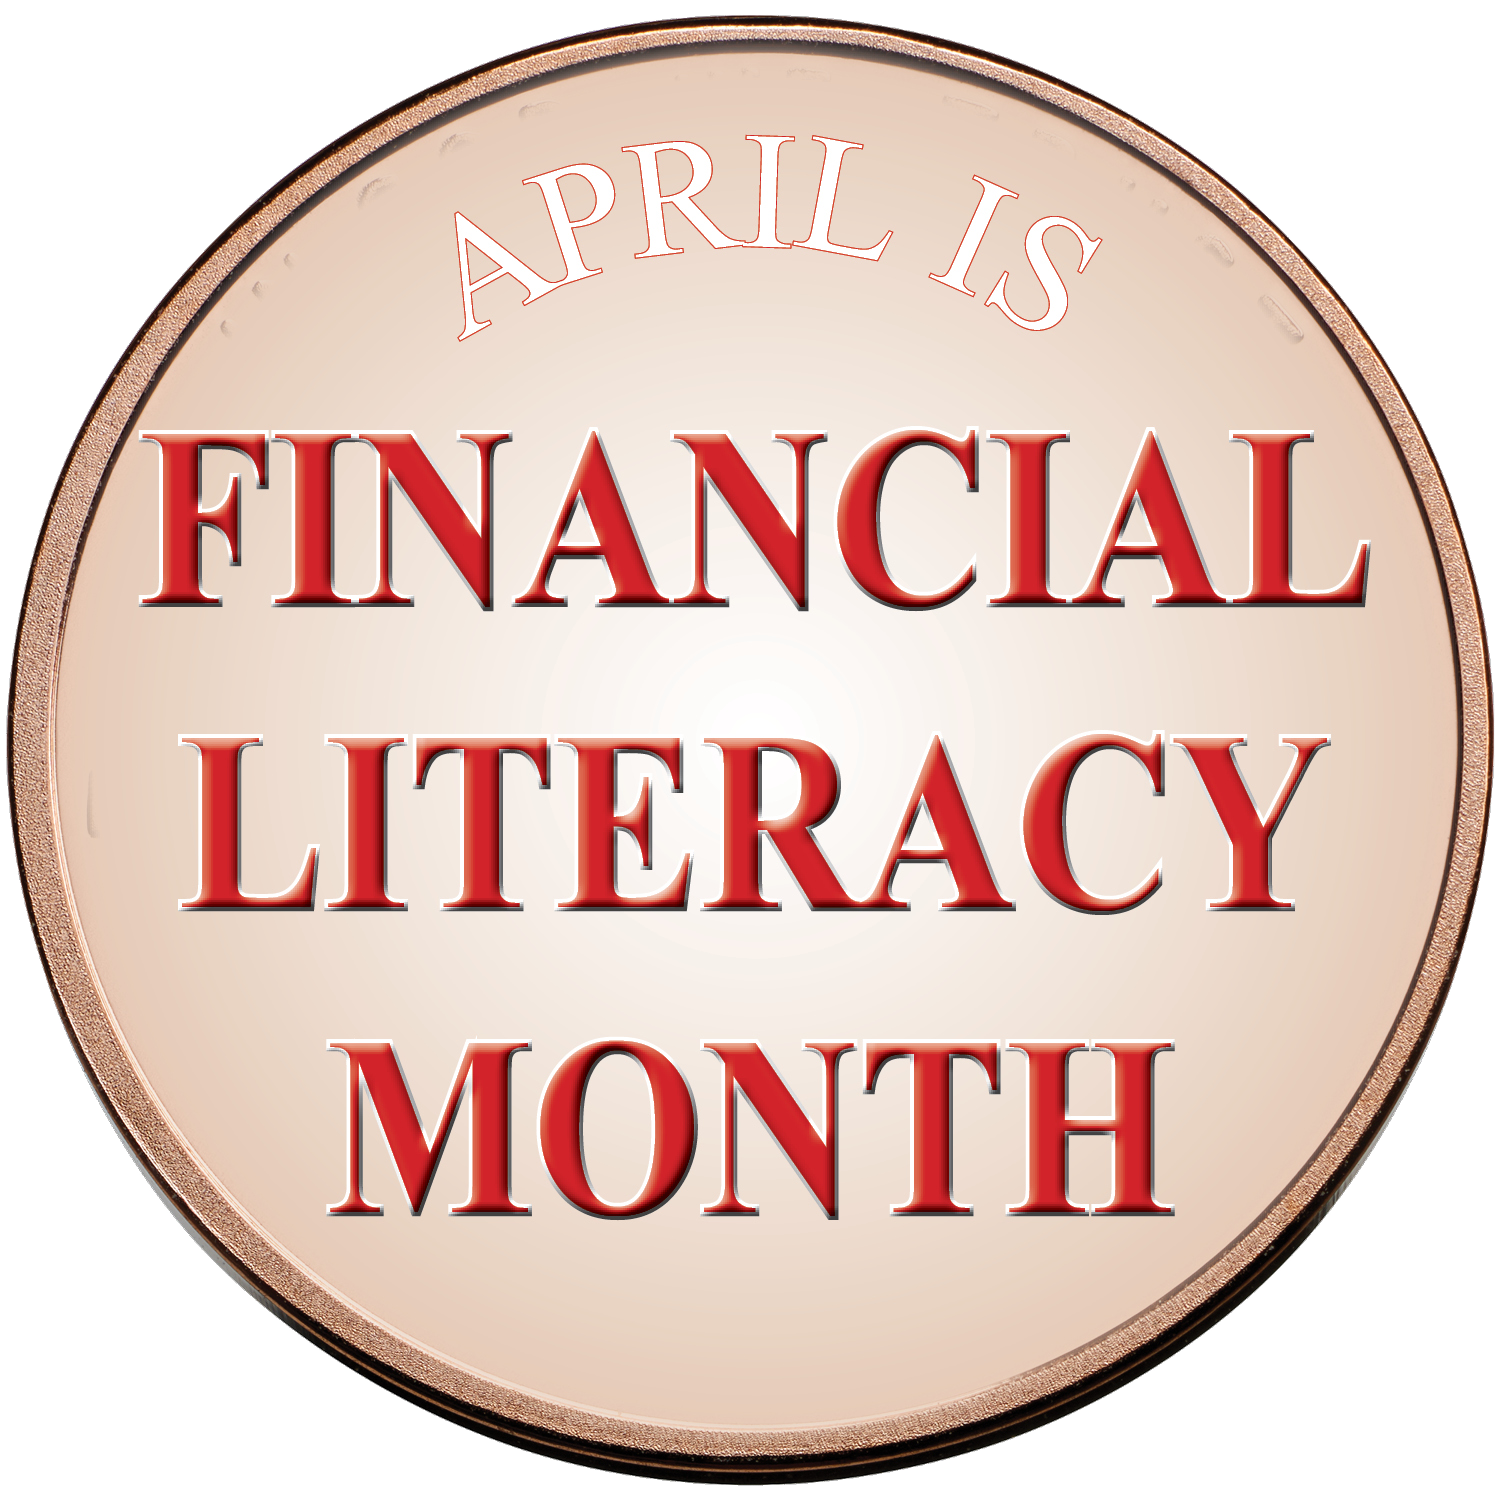 Stretch your dollar with Food for Fines & Financial Literacy Month at FDLPL